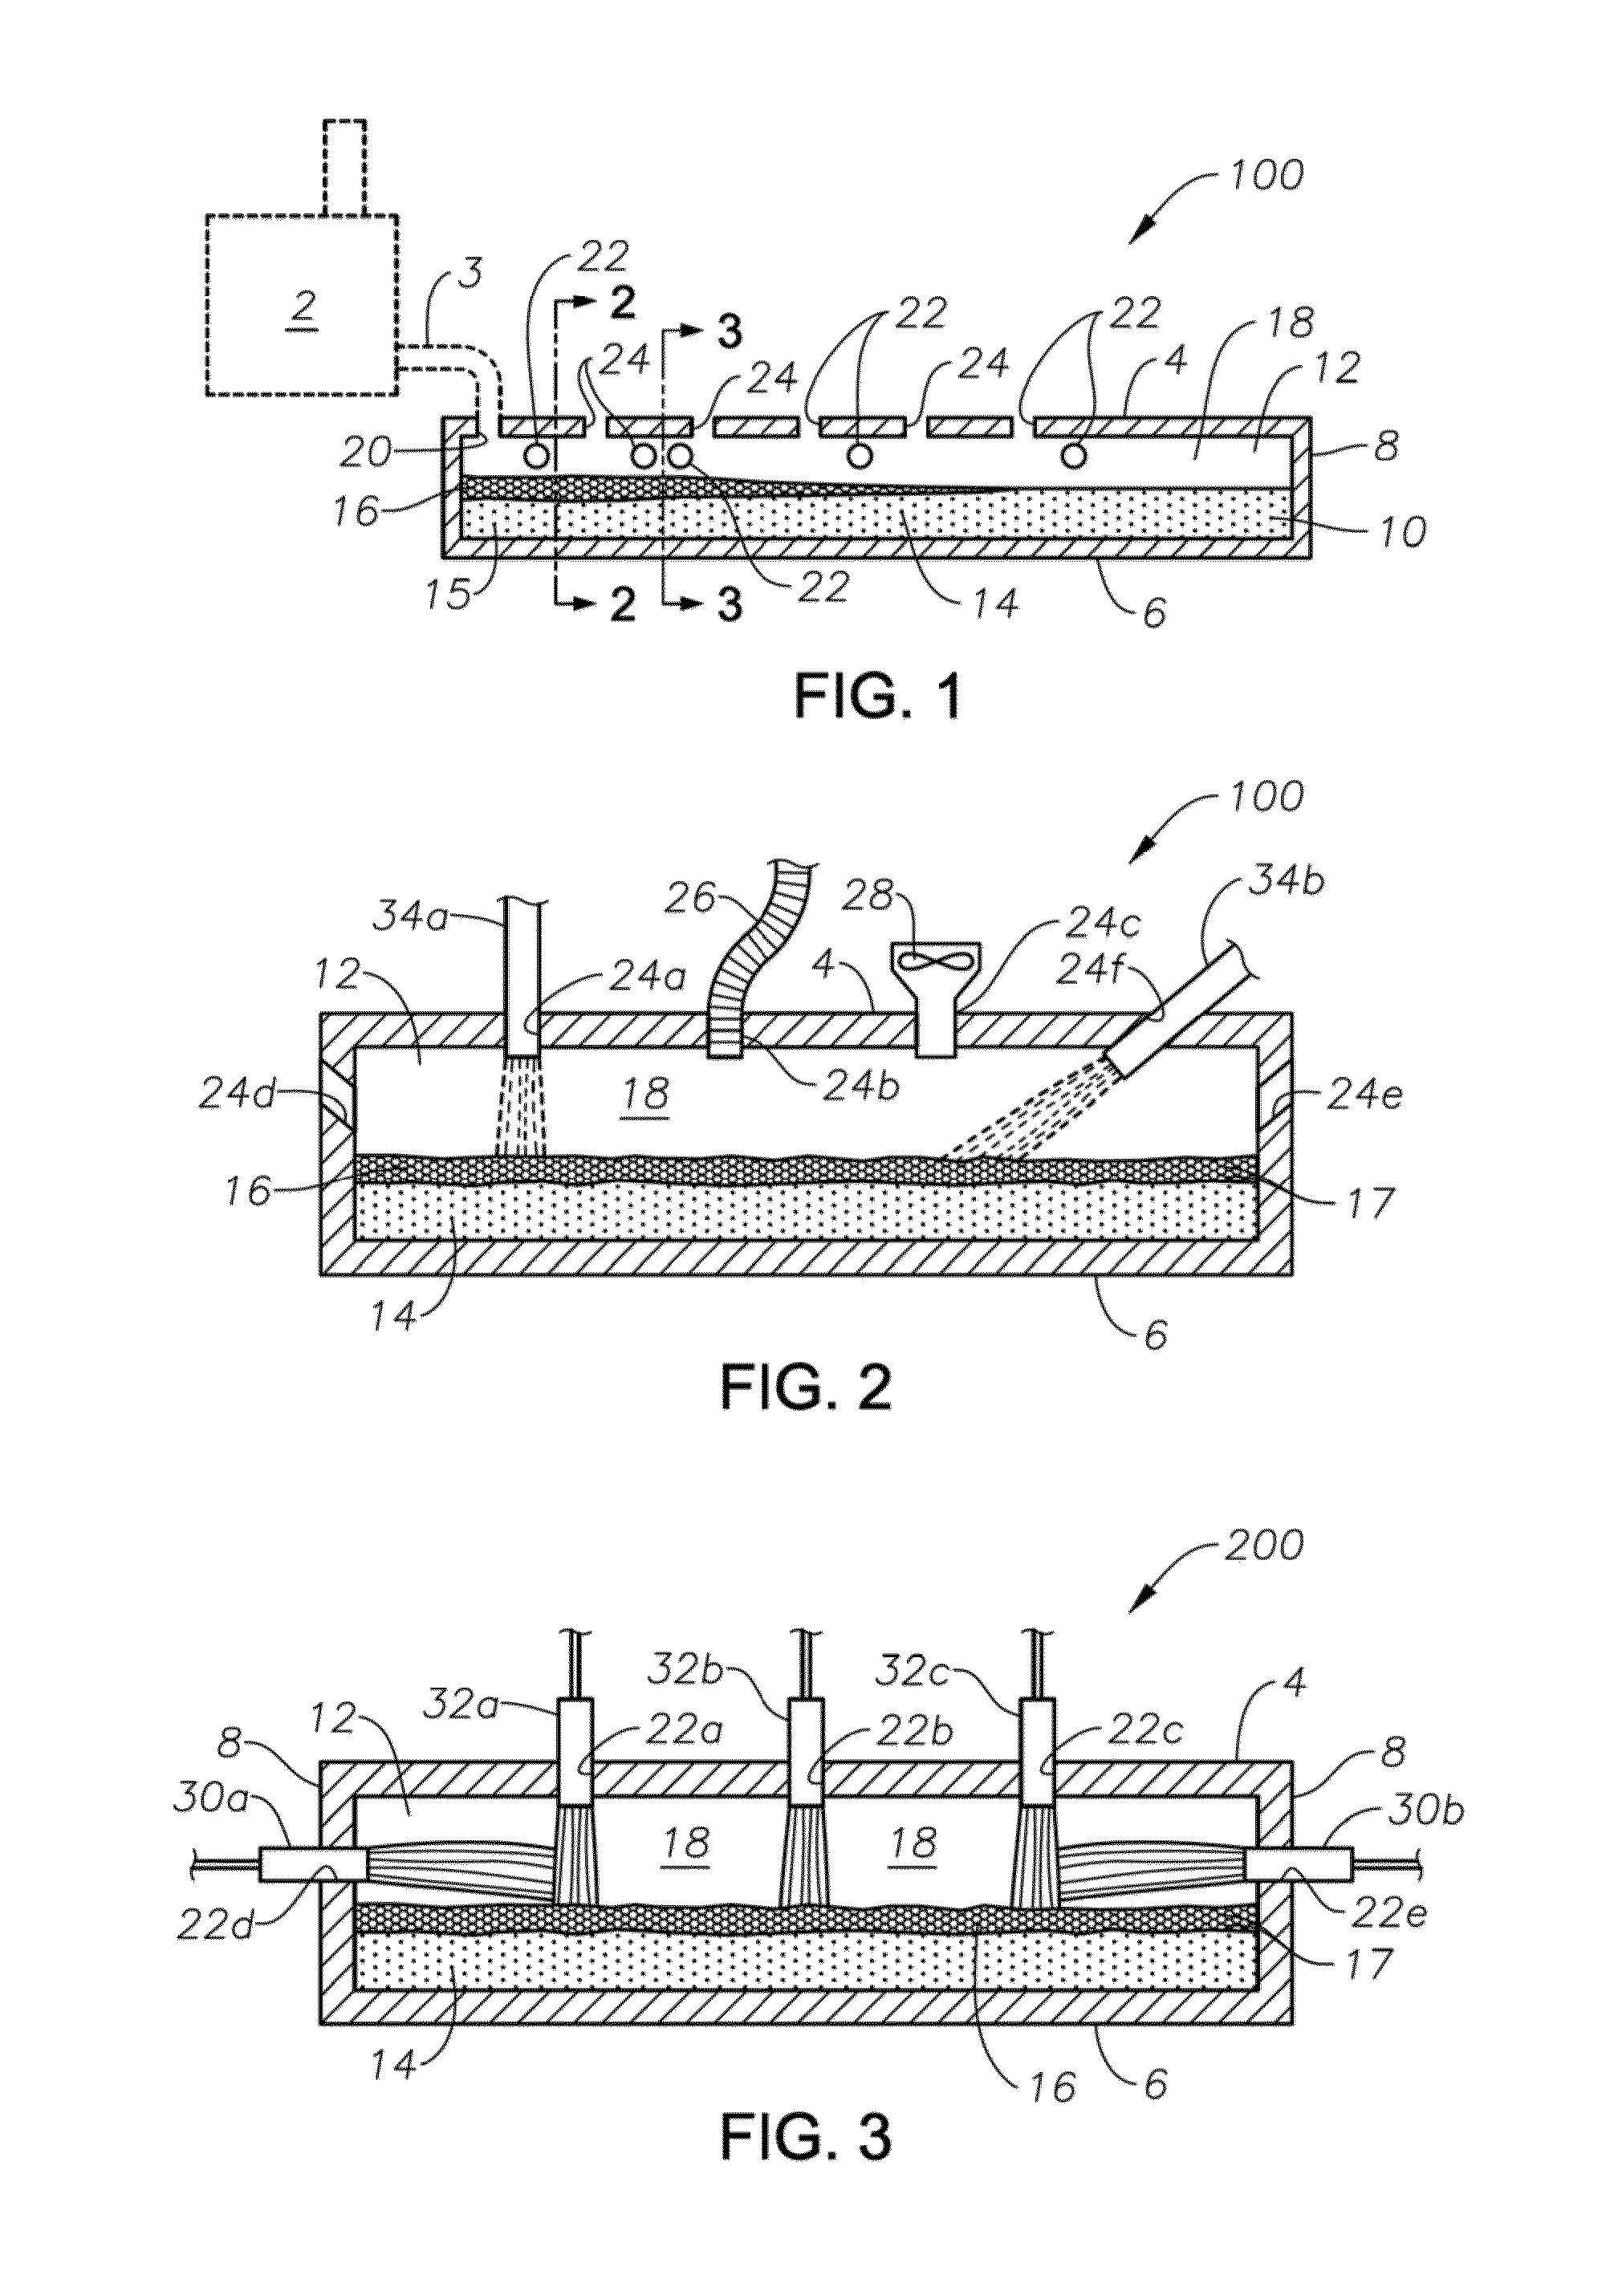 Methods and systems for controlling bubble size and bubble decay rate in foamed glass produced by a submerged combustion melter